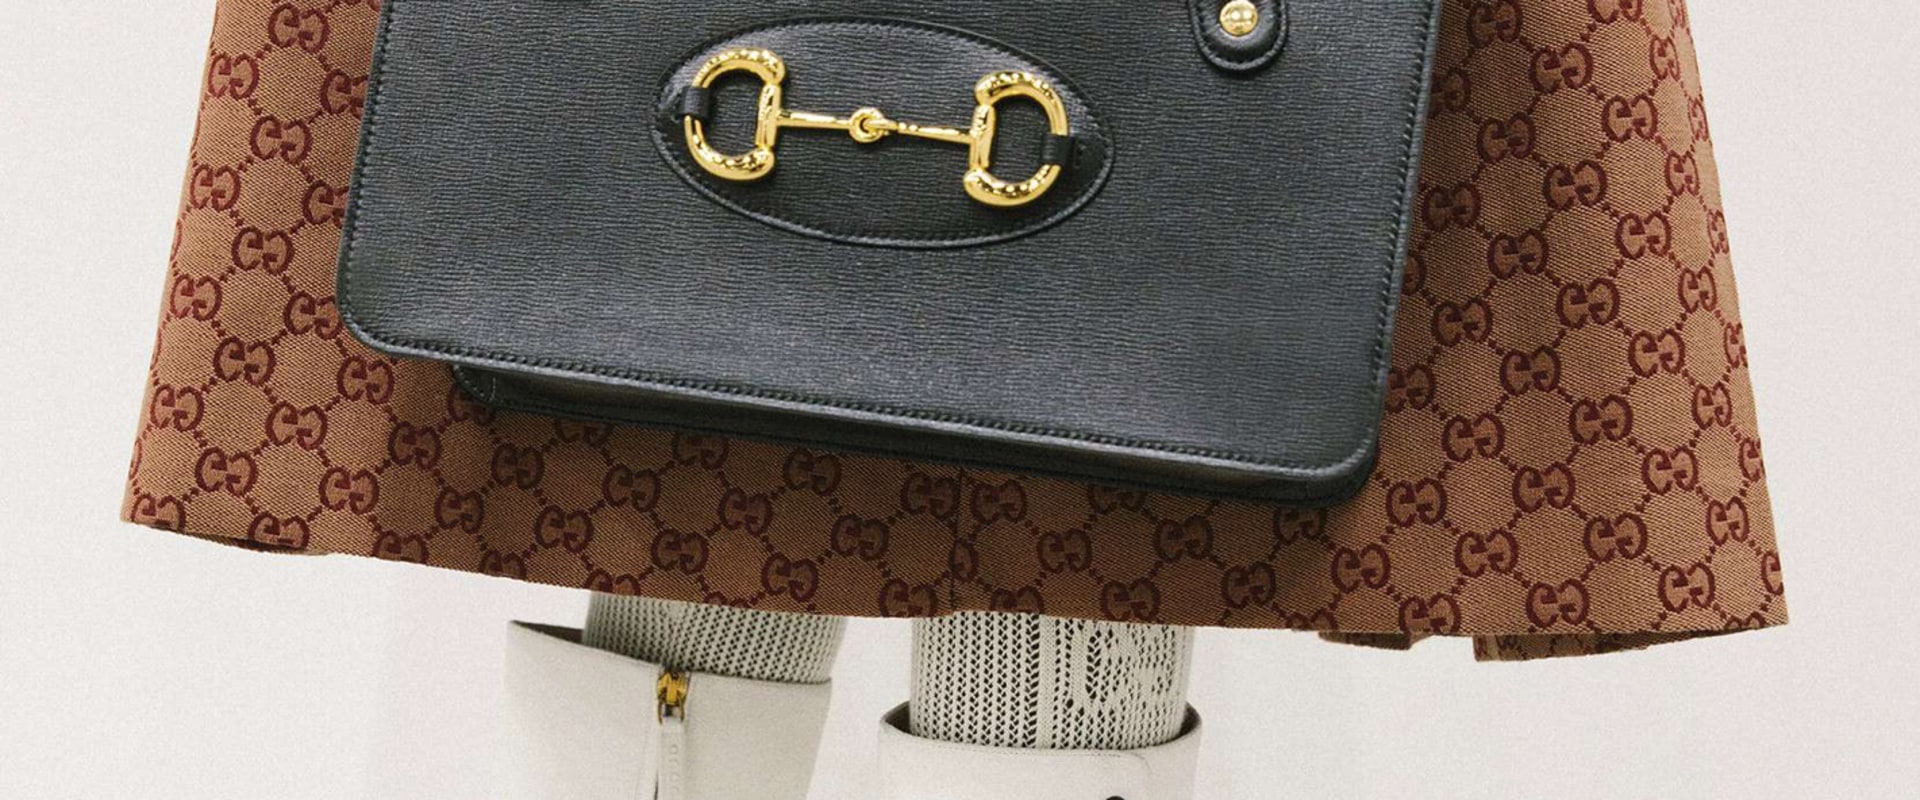 Where does coach rank in luxury brands?